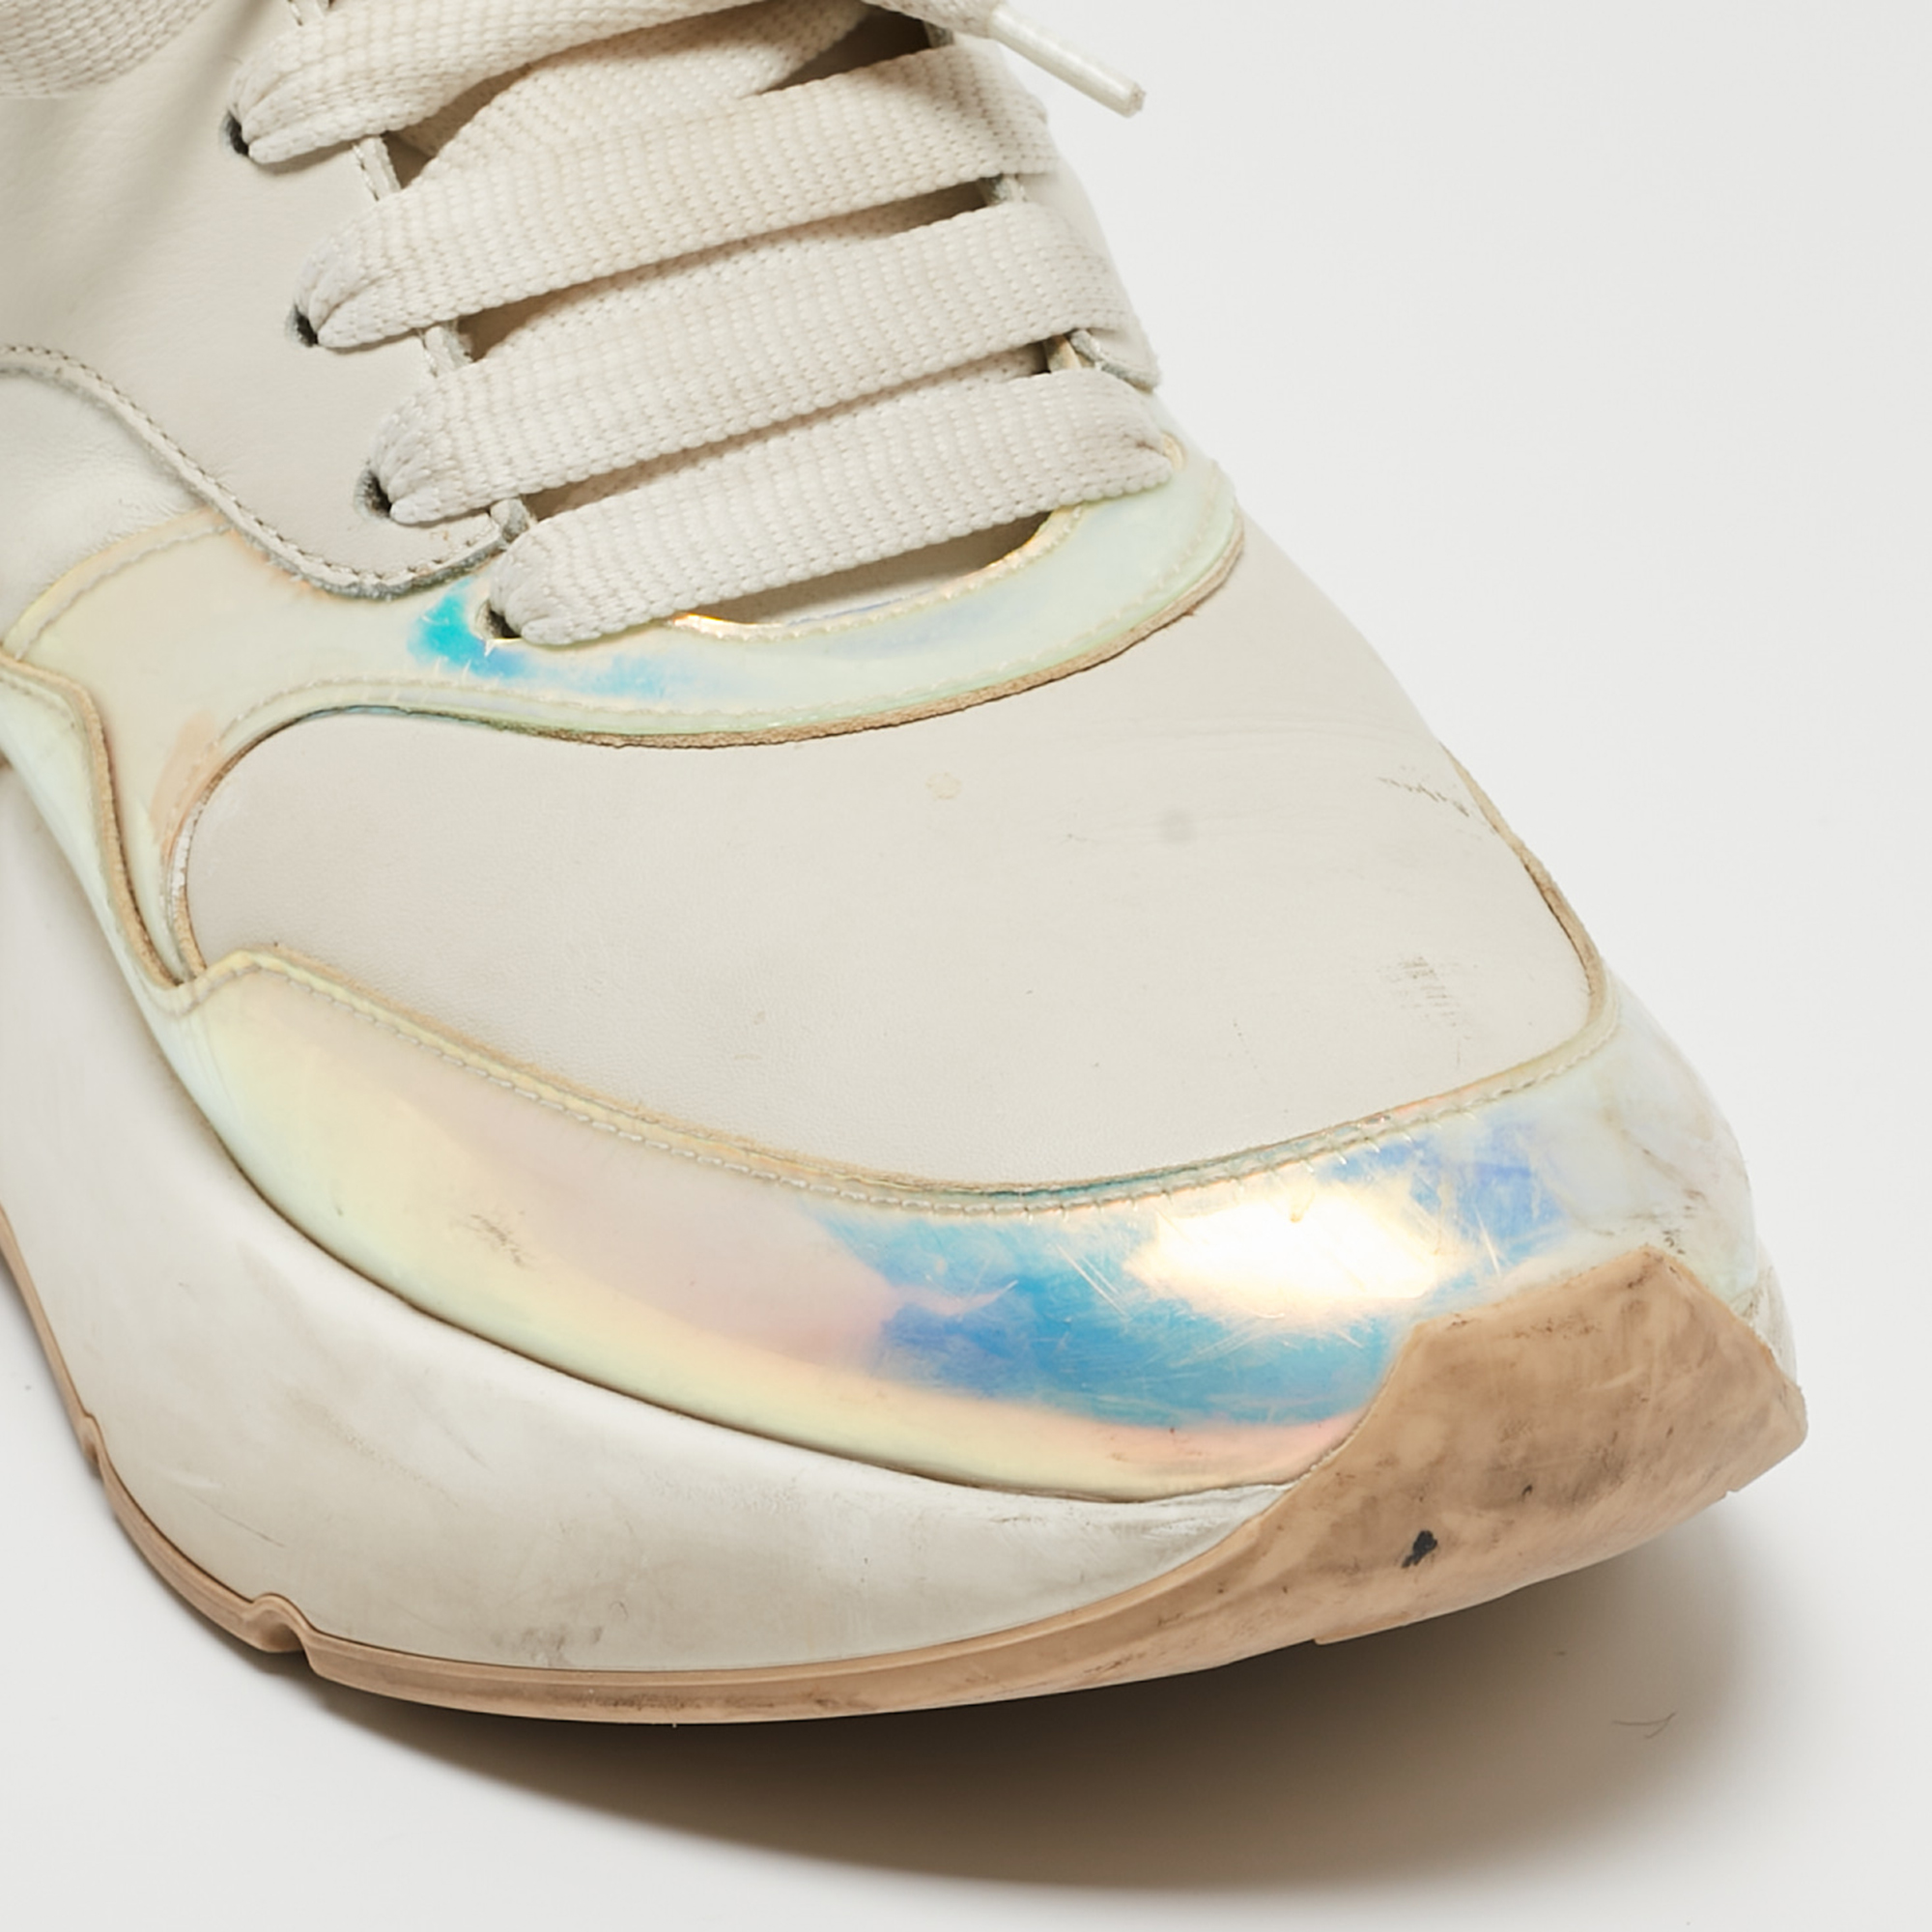 Alexander McQueen White/Holographic Leather Oversized Runner Sneakers Size 39.5